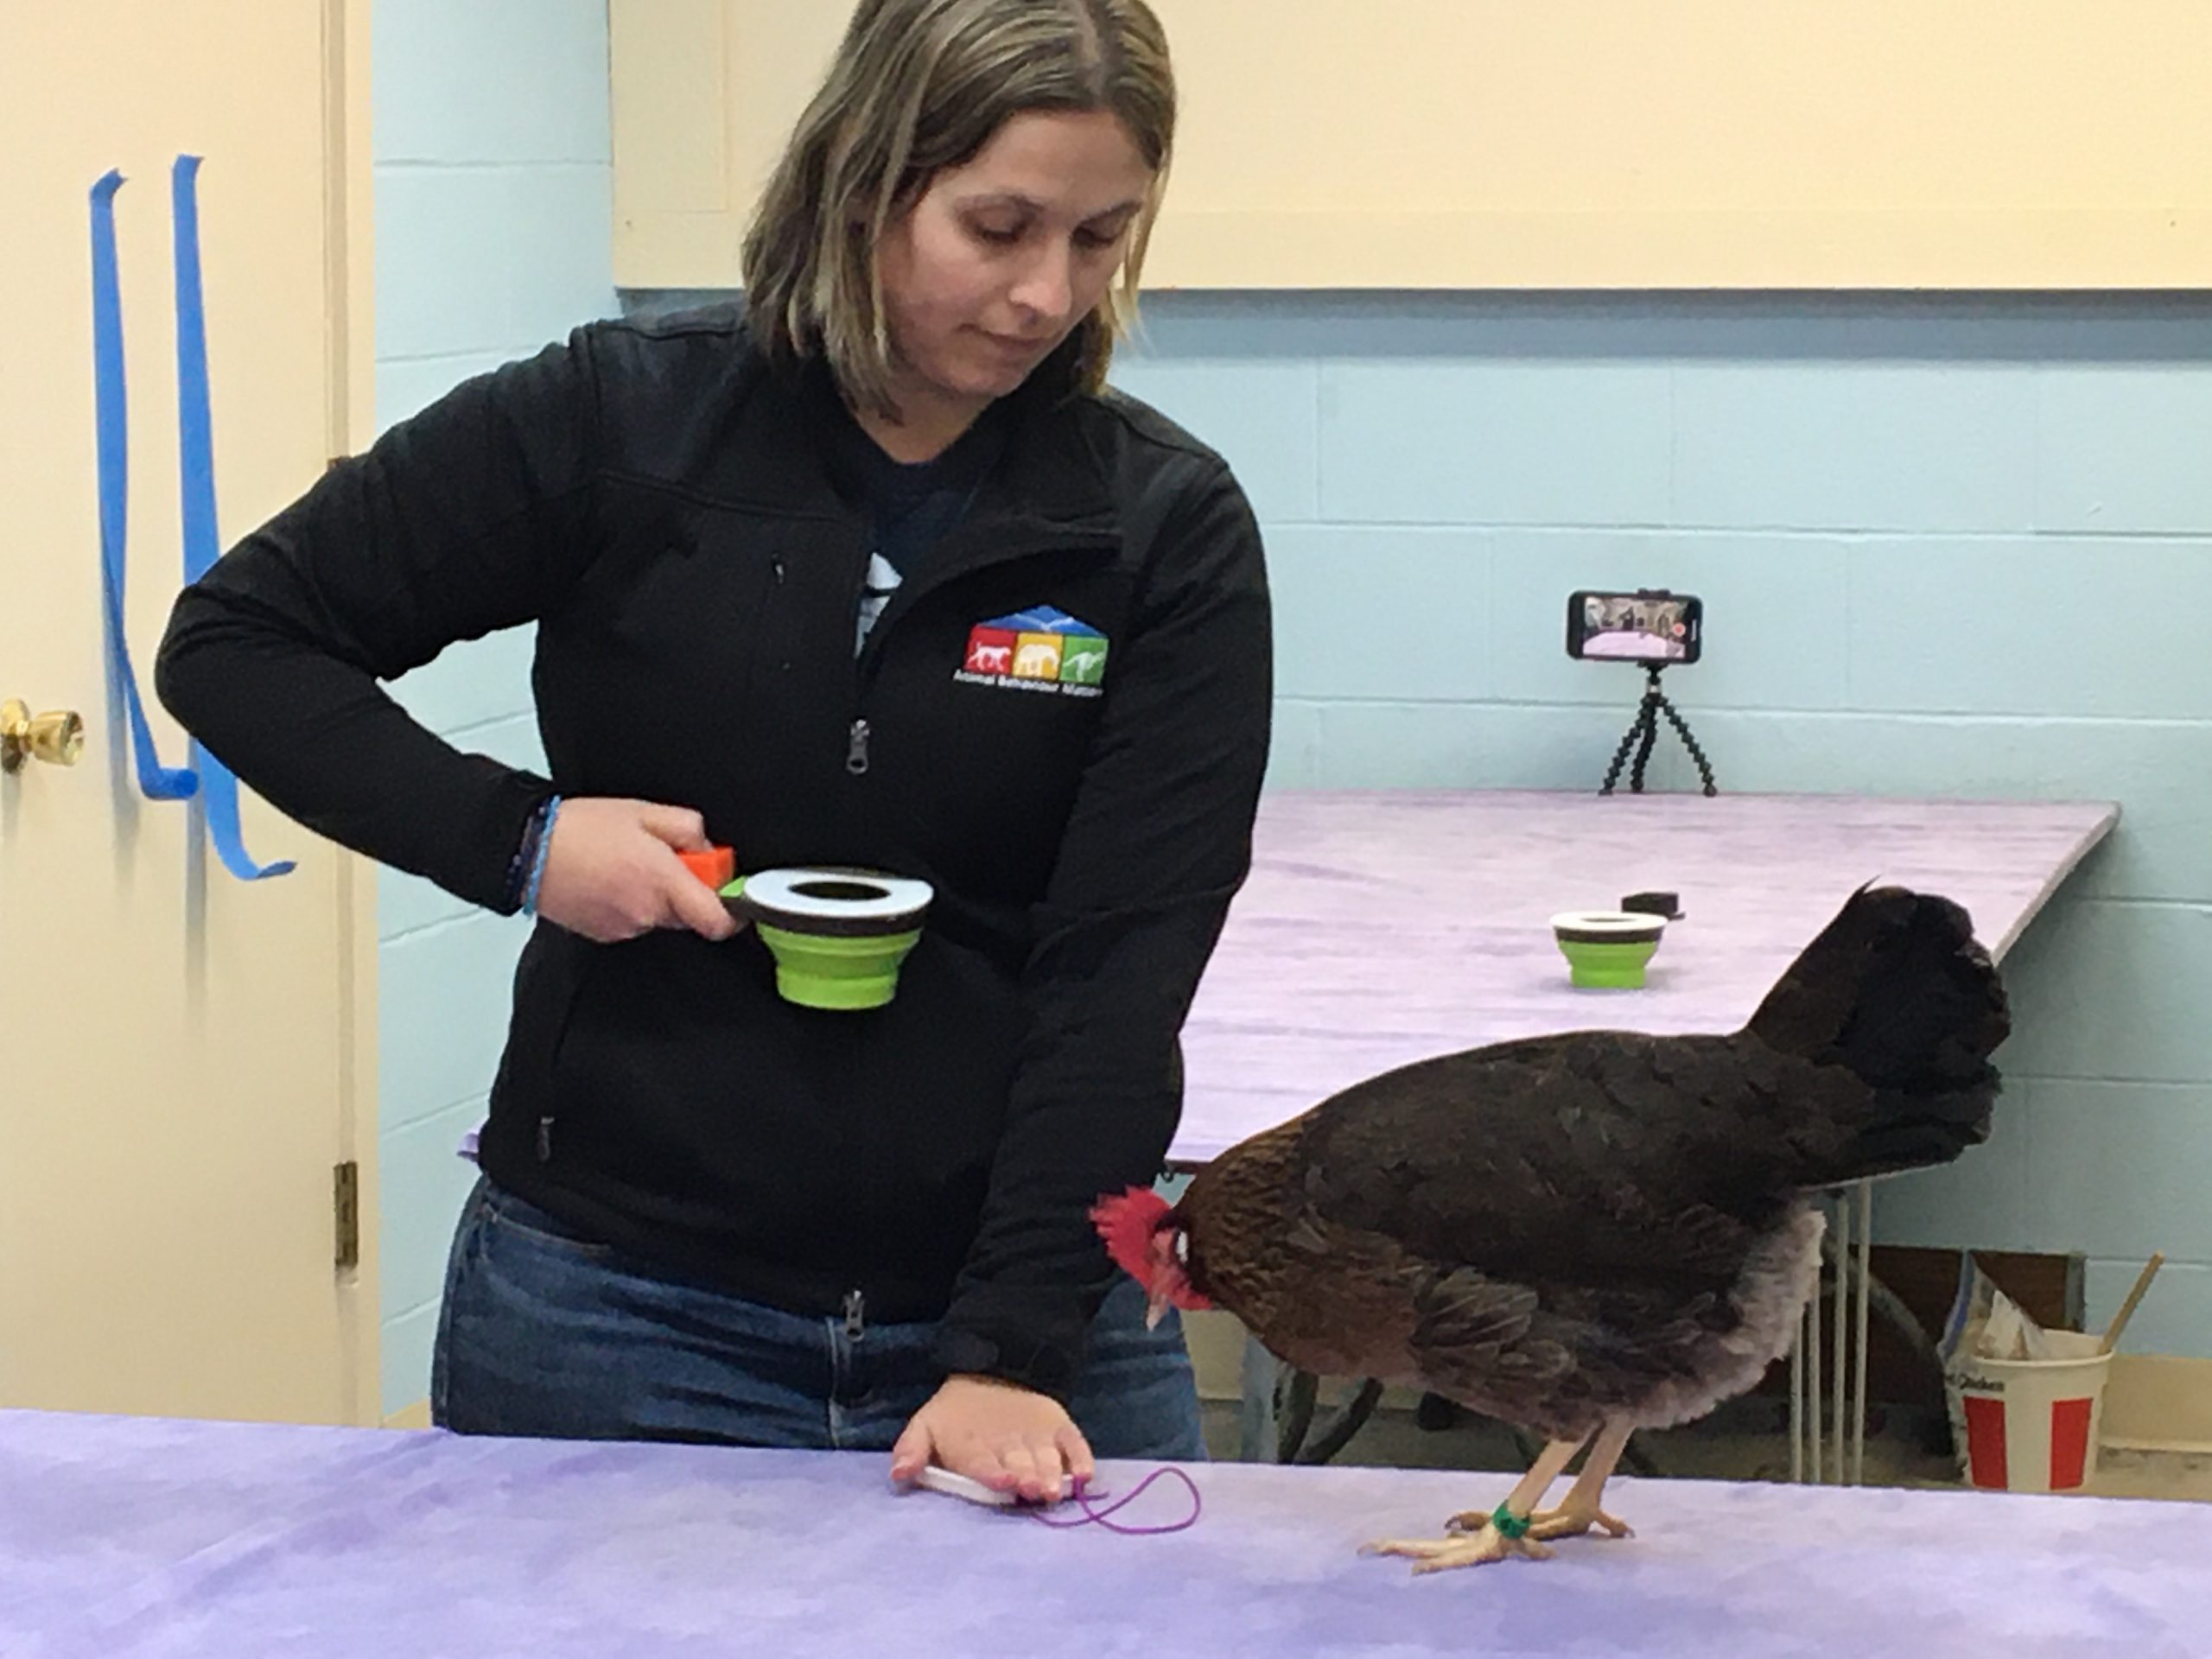 A female trainer with blonde hair, wearing a black long sleeve vest with logo, holds a cup with a clicker at chest height, leaning over a table with a purple tablecloth. A brown chicken stands looking at the piece of purple string held by the trainer on the table.